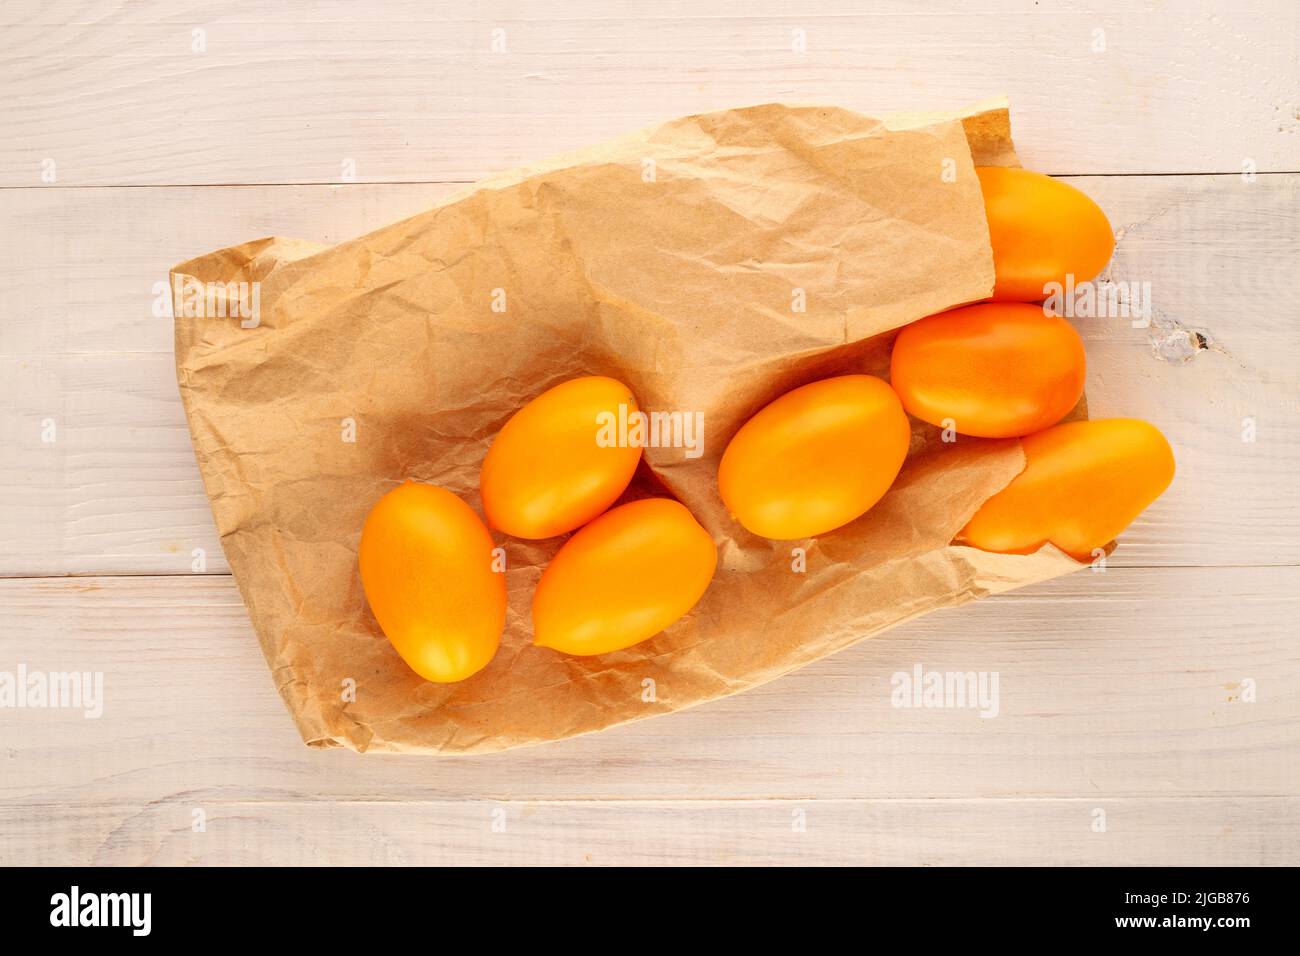 Several ripe yellow tomatoes with a paper bag on a wooden table, close-up, top view. Stock Photo